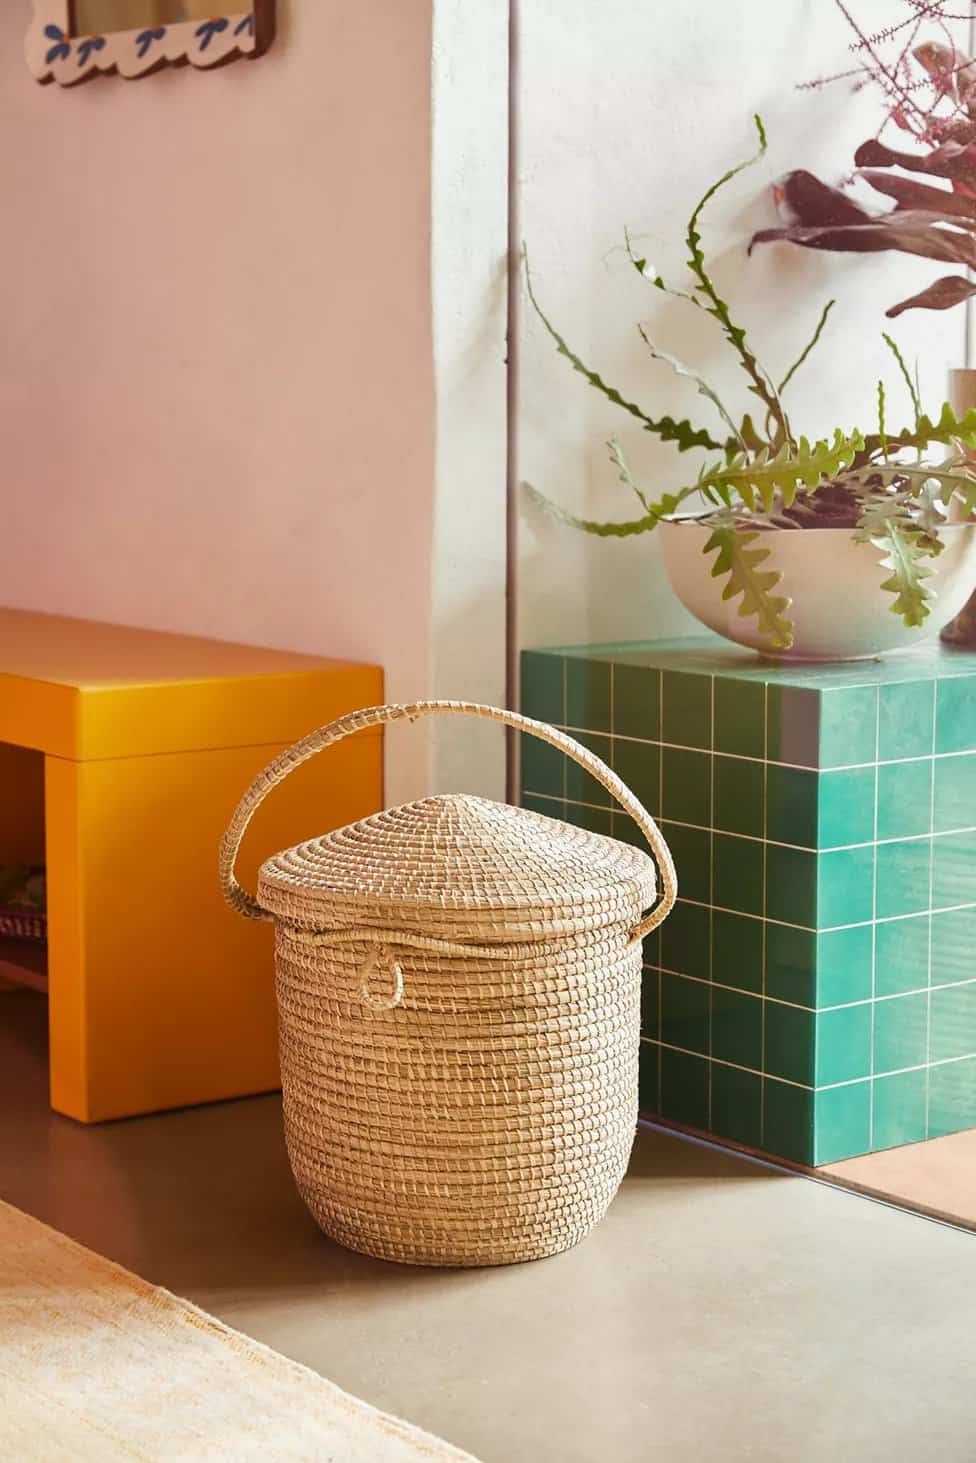 Baskets Look Stylish While Storing All Your Shoes